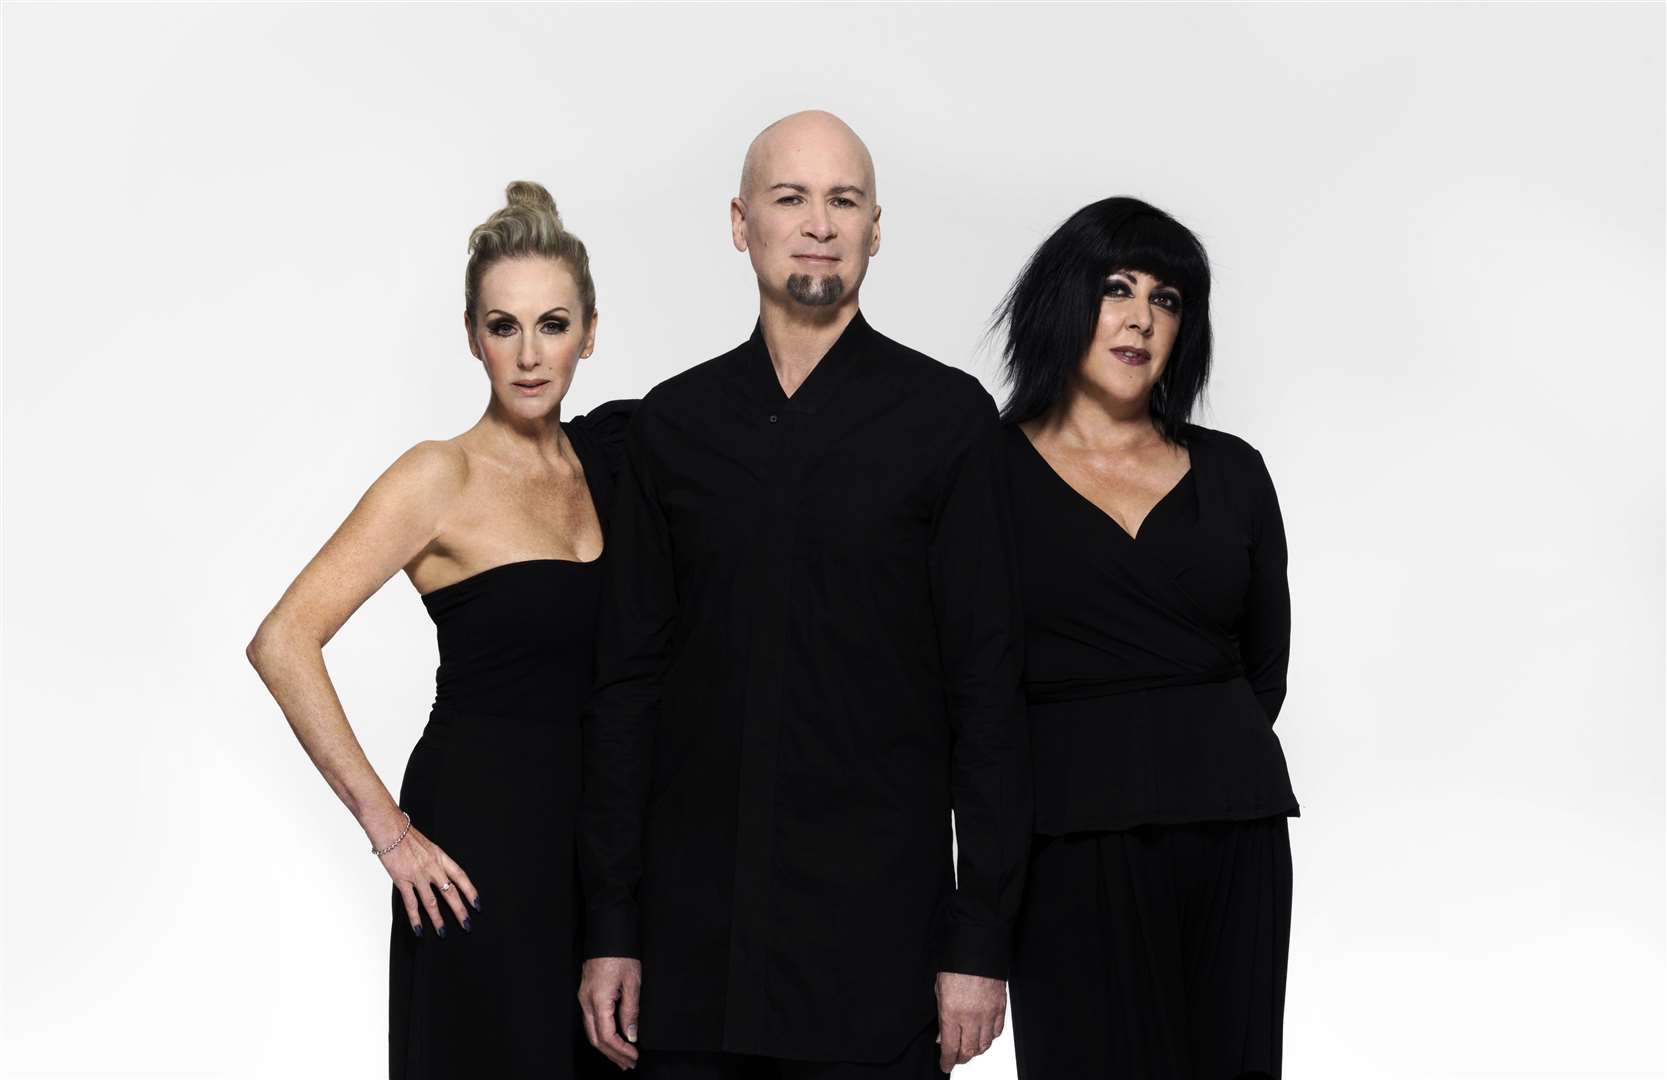 The Human League are also performing in the Rochester Castle Concert series alongside Cameo, James Blunt and The Specials. Picture: The Human League